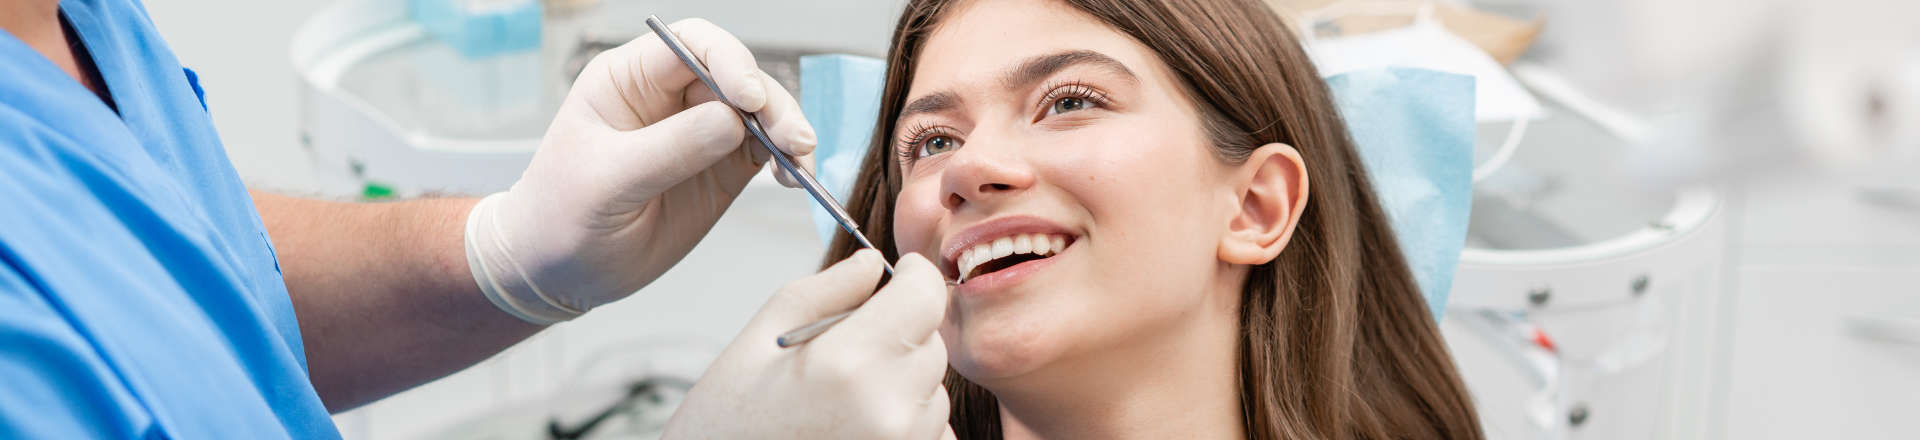 young woman during dental procedure